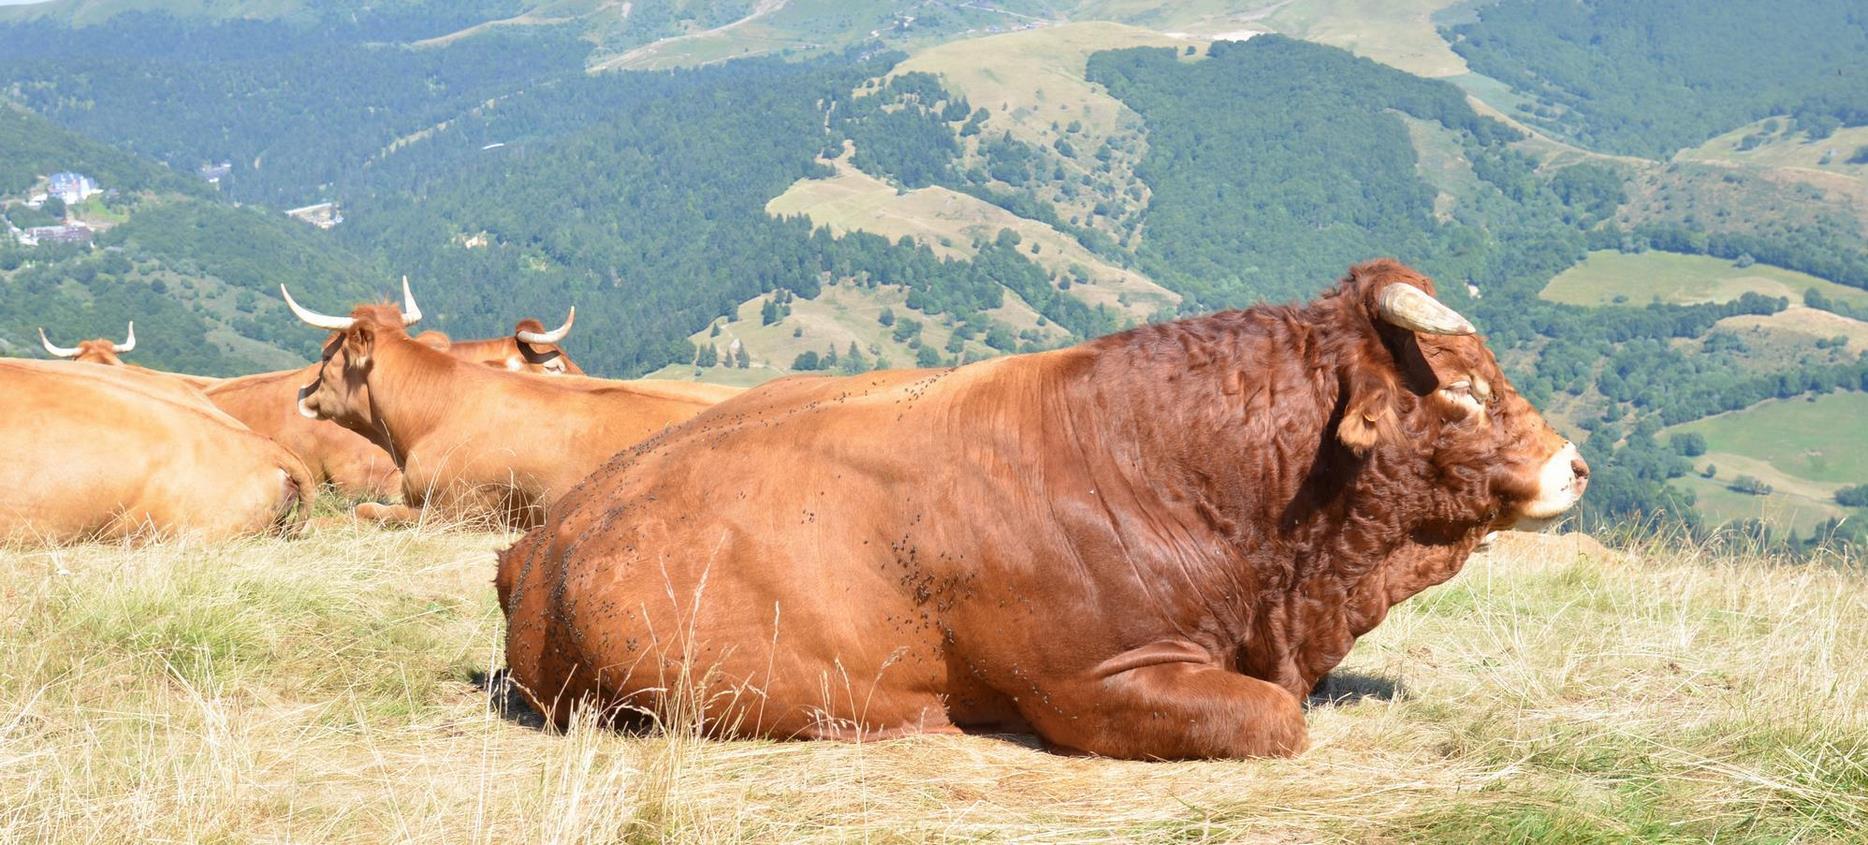 Bull in the mountain pastures in the Parc des Volcans d'Auvergne